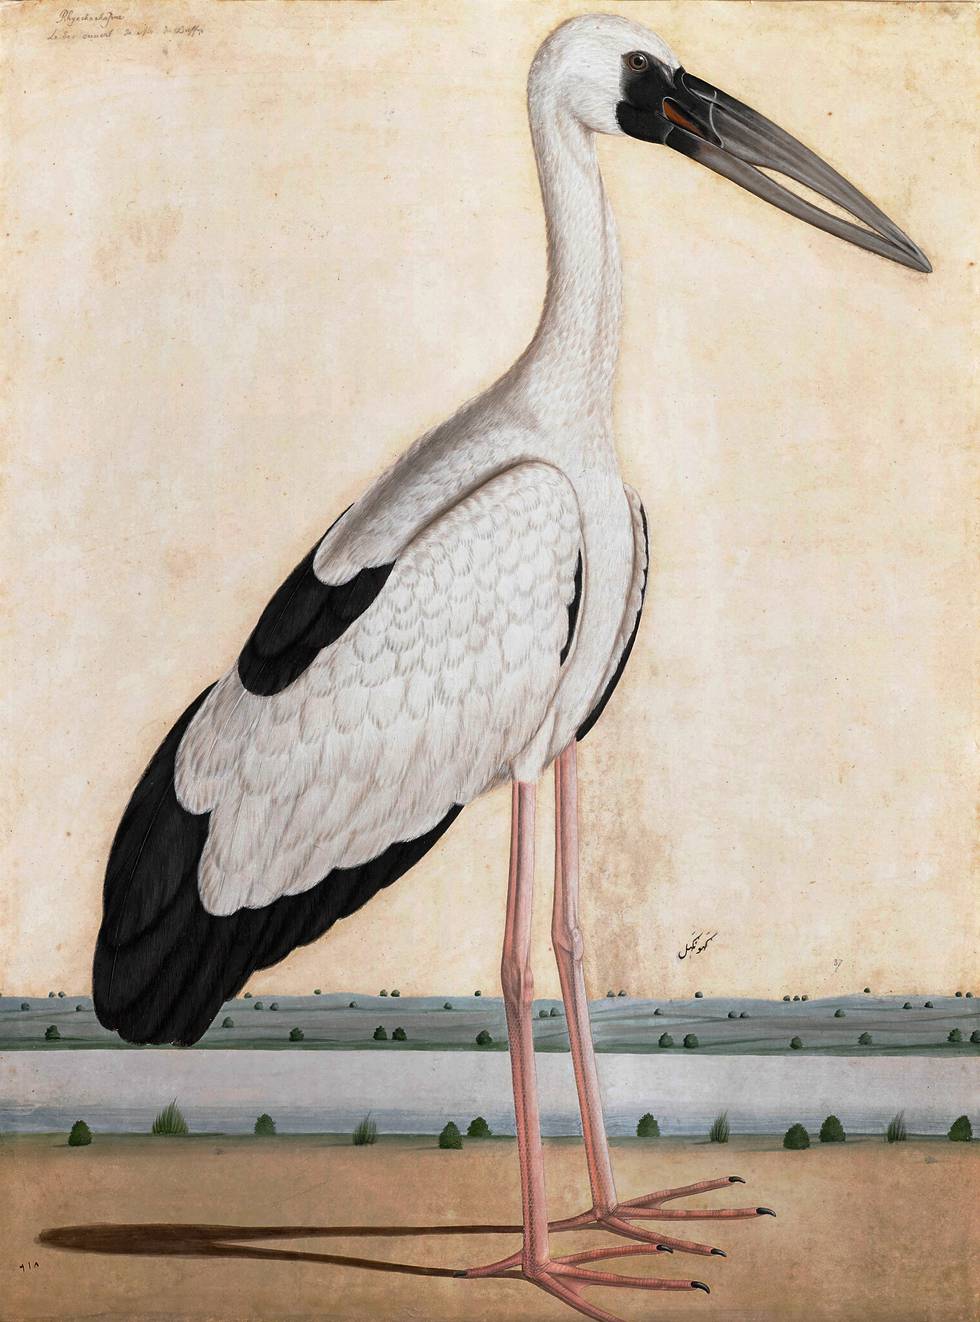 A painting of a stork